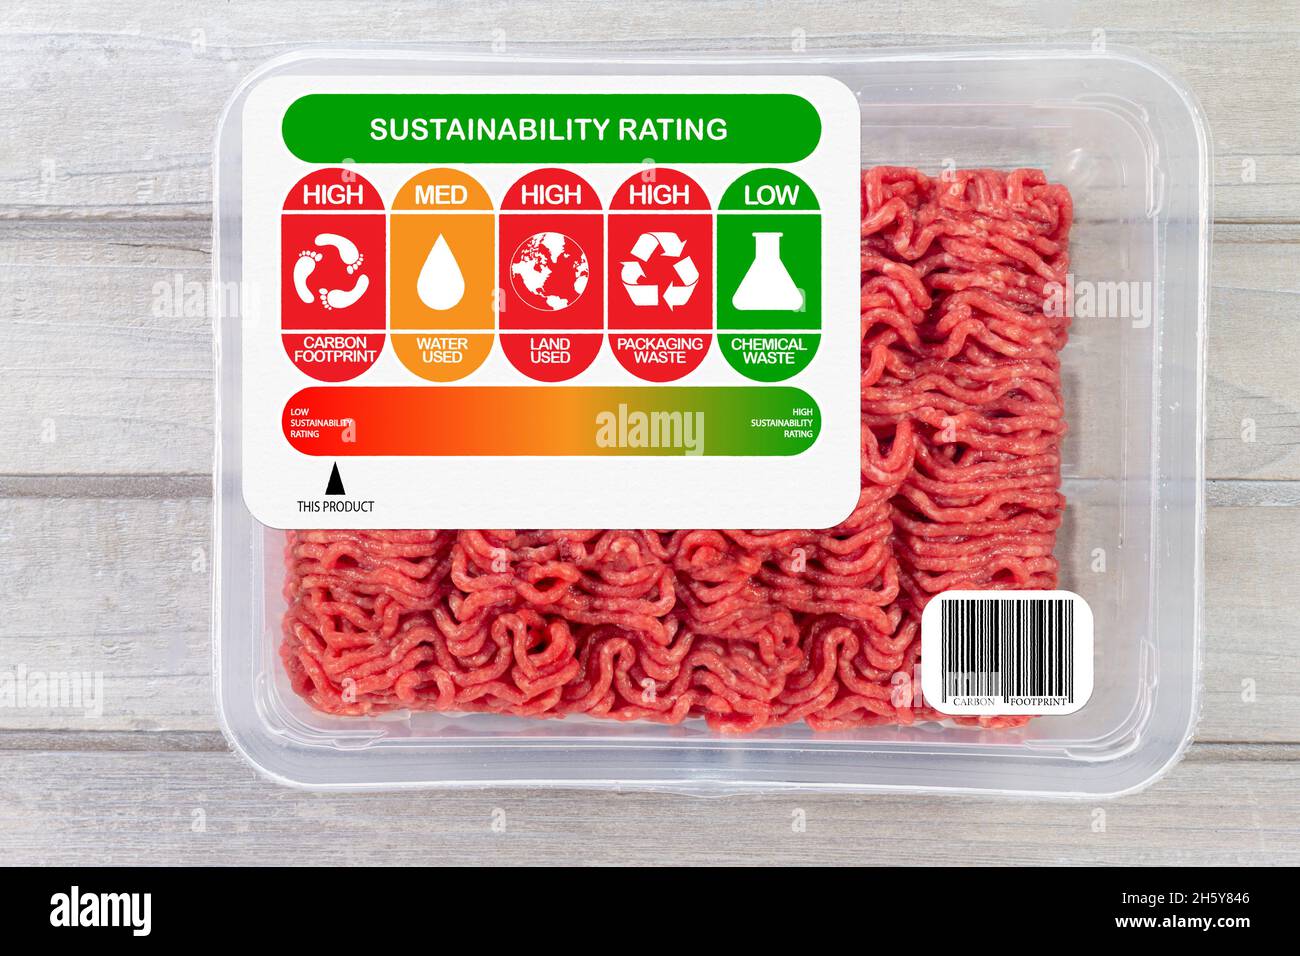 Sustainability Rating on meat for carbon footprint, water use, land use, packaging waste and chemical waste label. Product scale on rating index. Cons Stock Photo